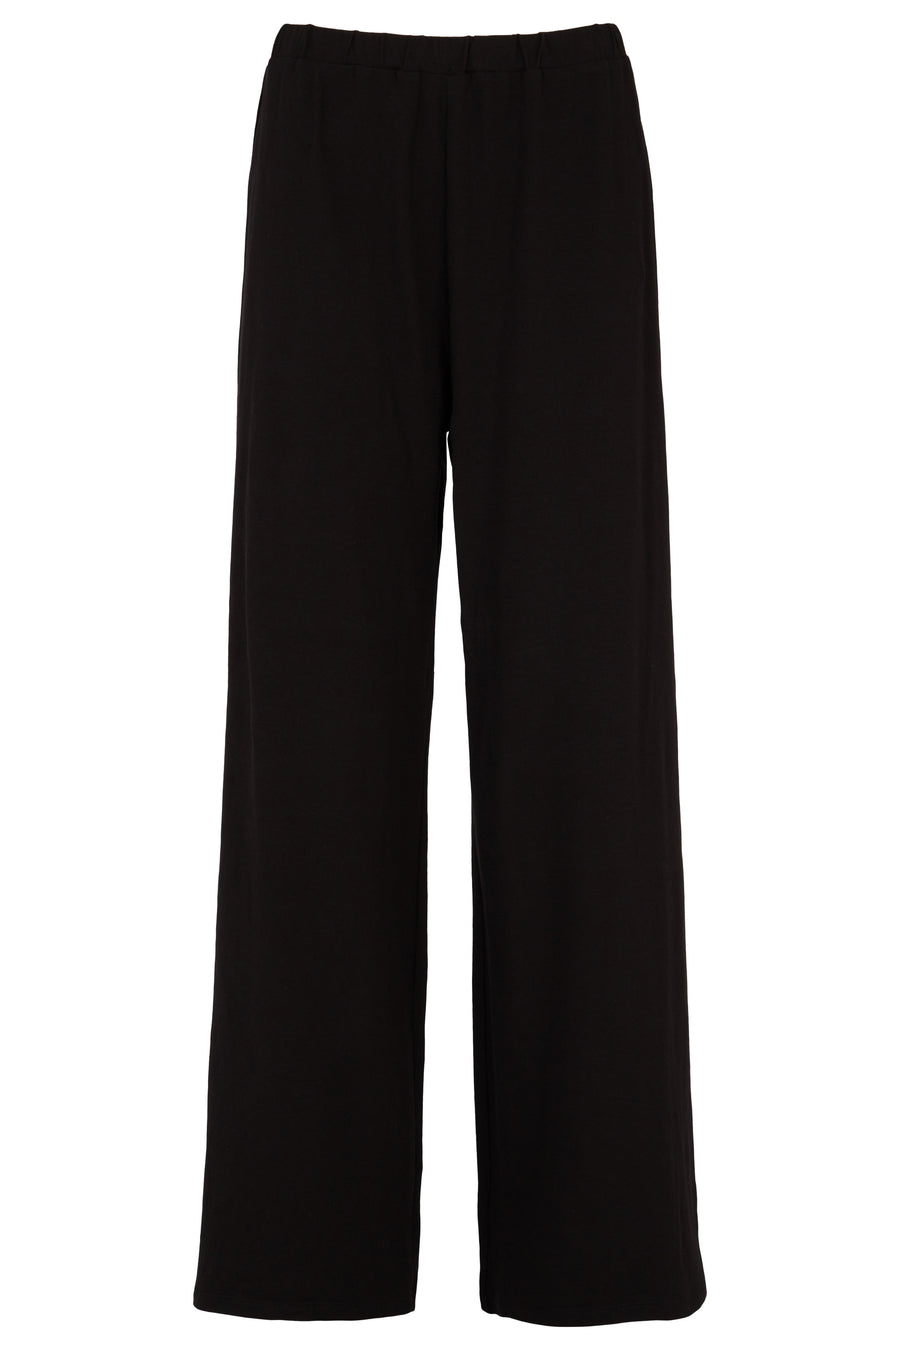 People Tree Fair Trade, Ethical & Sustainable Jacinta trousers in Black 95% organic certified cotton, 5% elastane